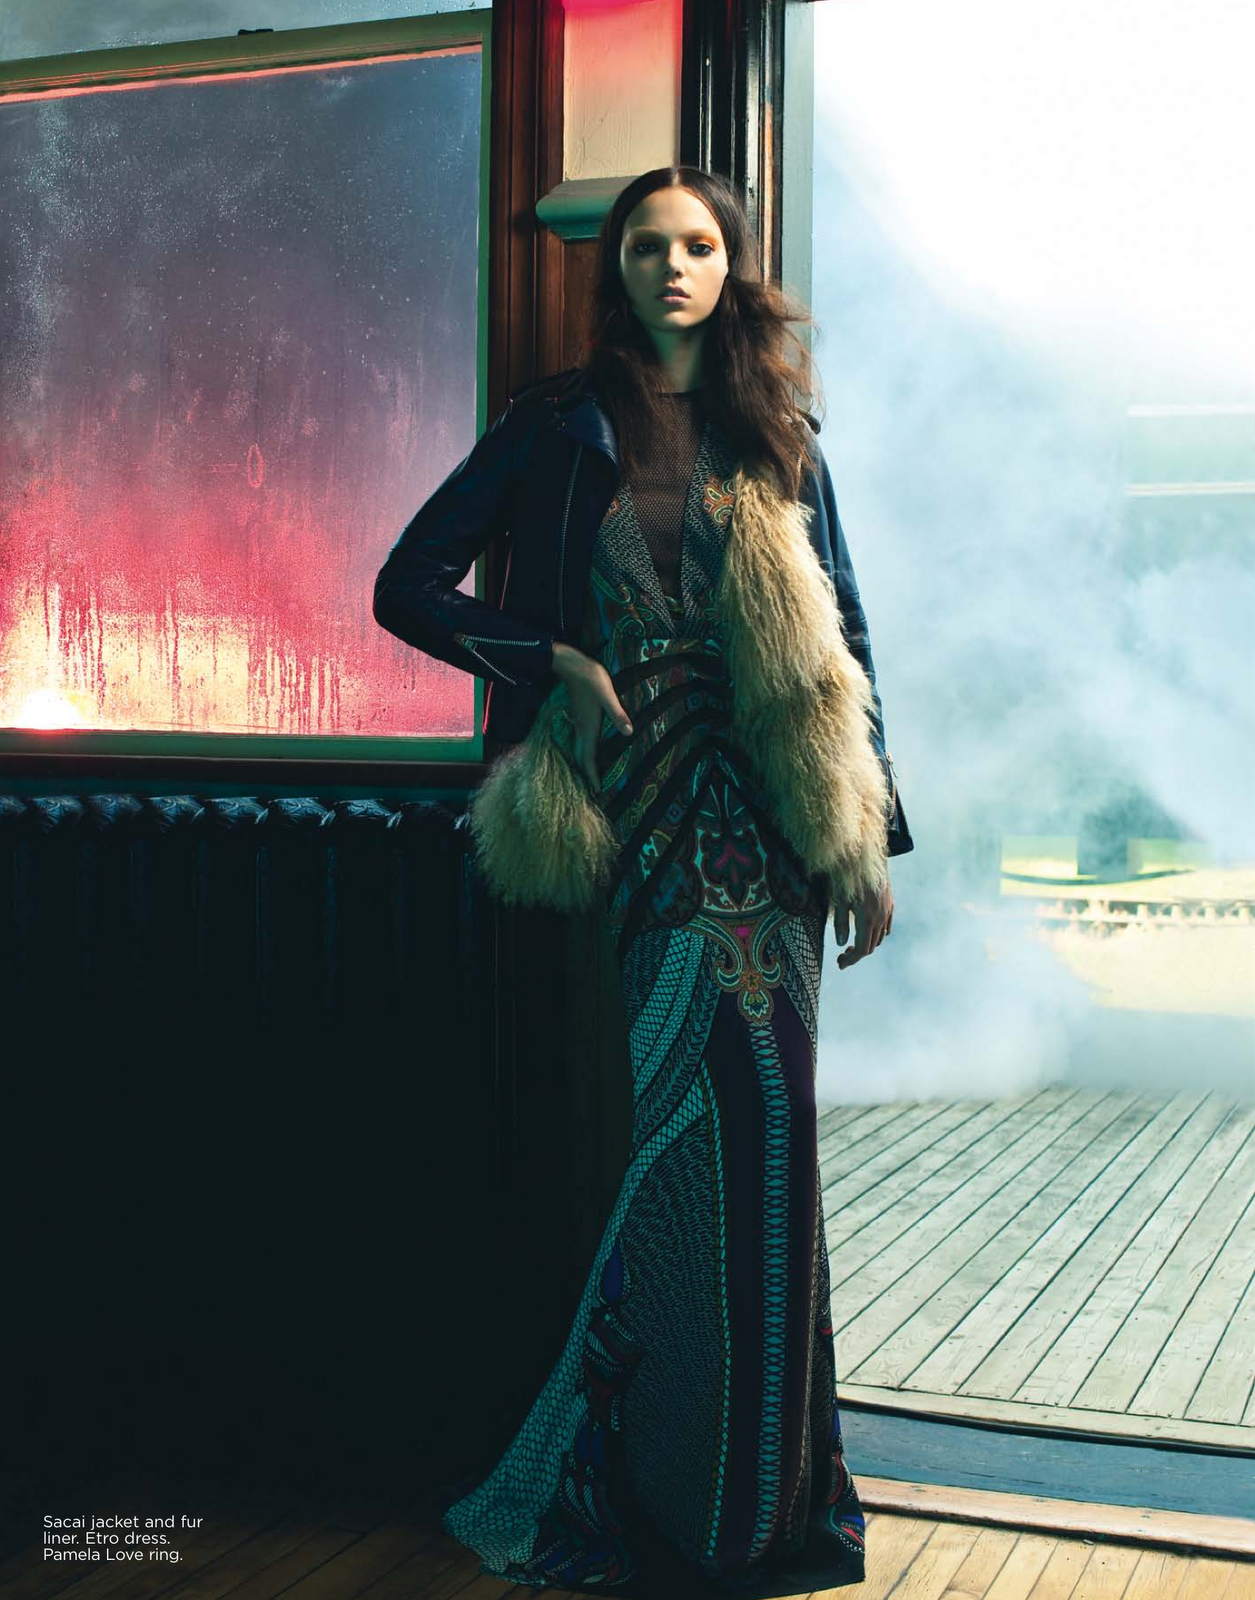 transport yourself: jenna earle by andrew soule for flare november 2012 ...